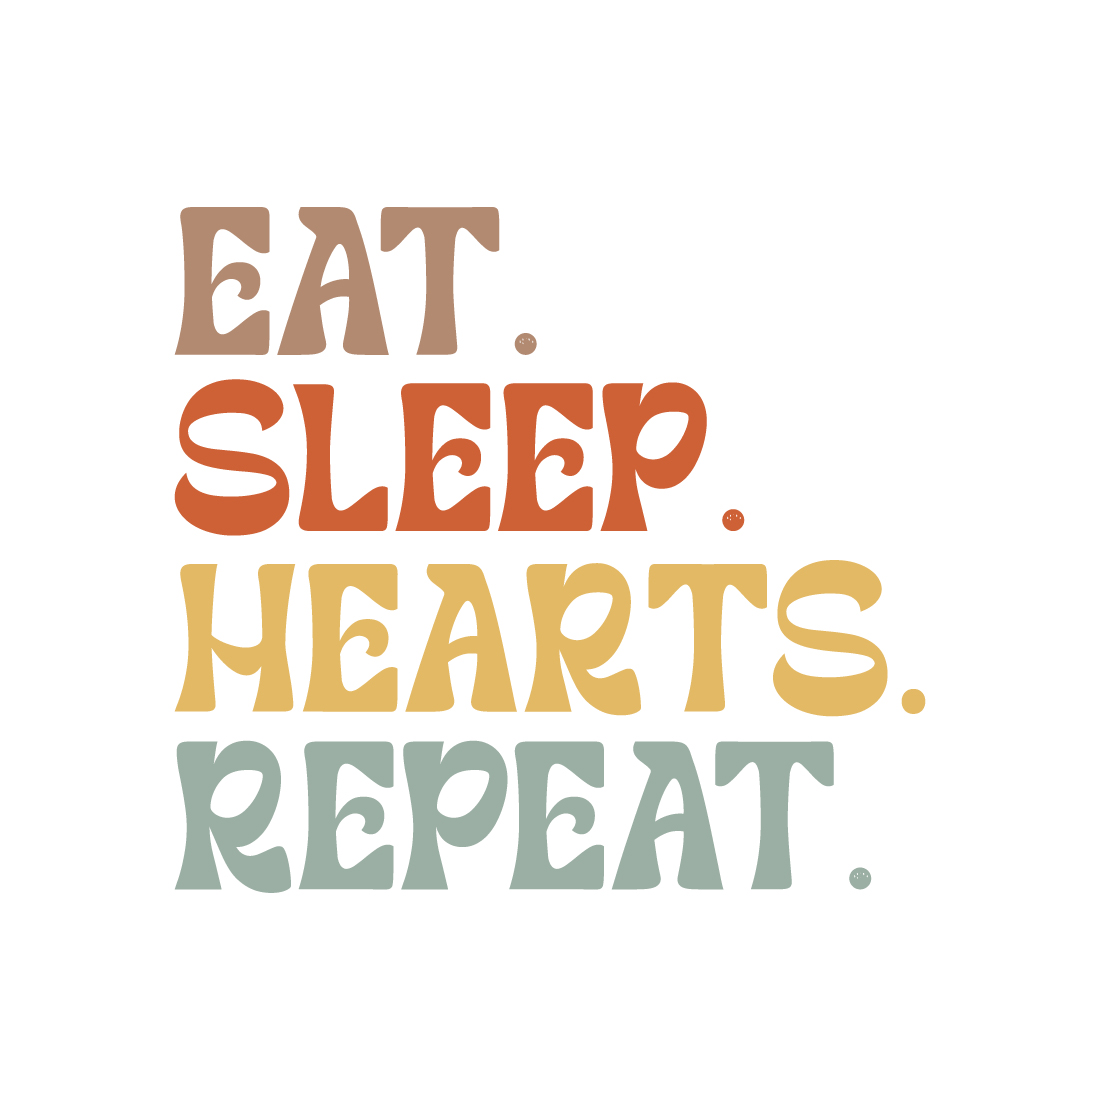 Eat Sleep Hearts Repeat indoor game typography design for t-shirts, cards, frame artwork, phone cases, bags, mugs, stickers, tumblers, print, etc preview image.